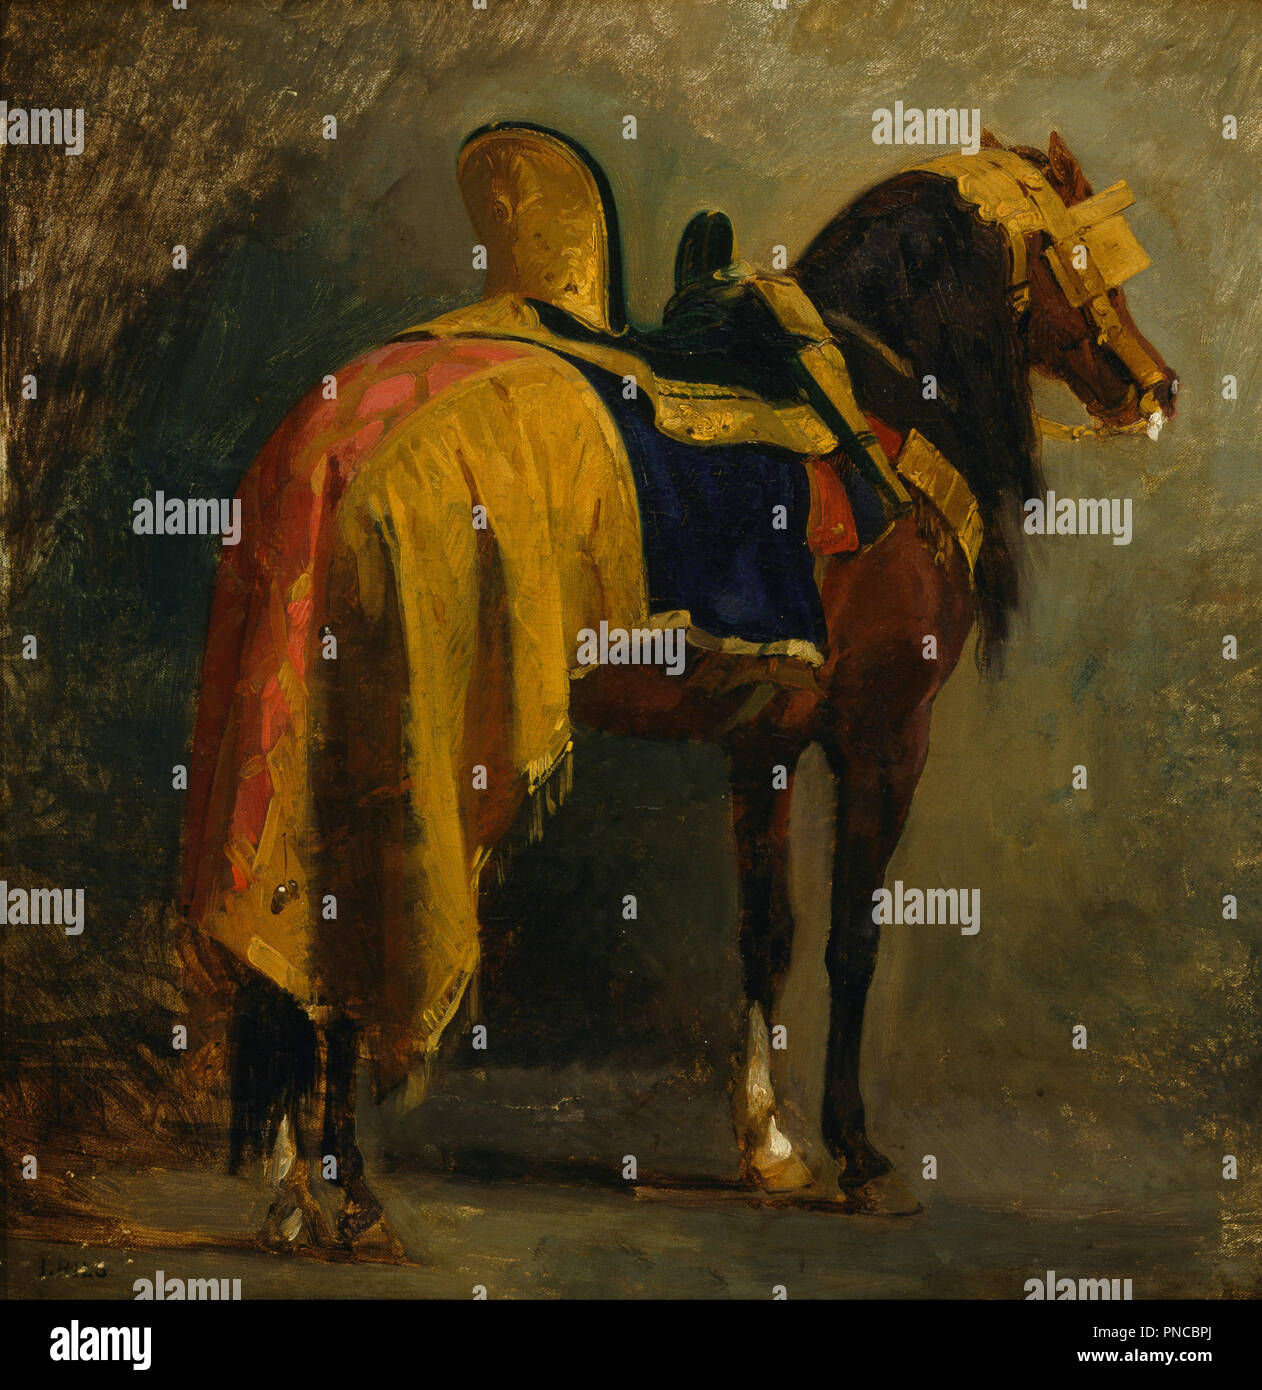 Horse caparisoned. Date/Period: Ca. 1860. Painting. Oil on canvas. Height: 635 mm (25 in); Width: 625 mm (24.60 in). Author: ISIDORE PILS. Stock Photo